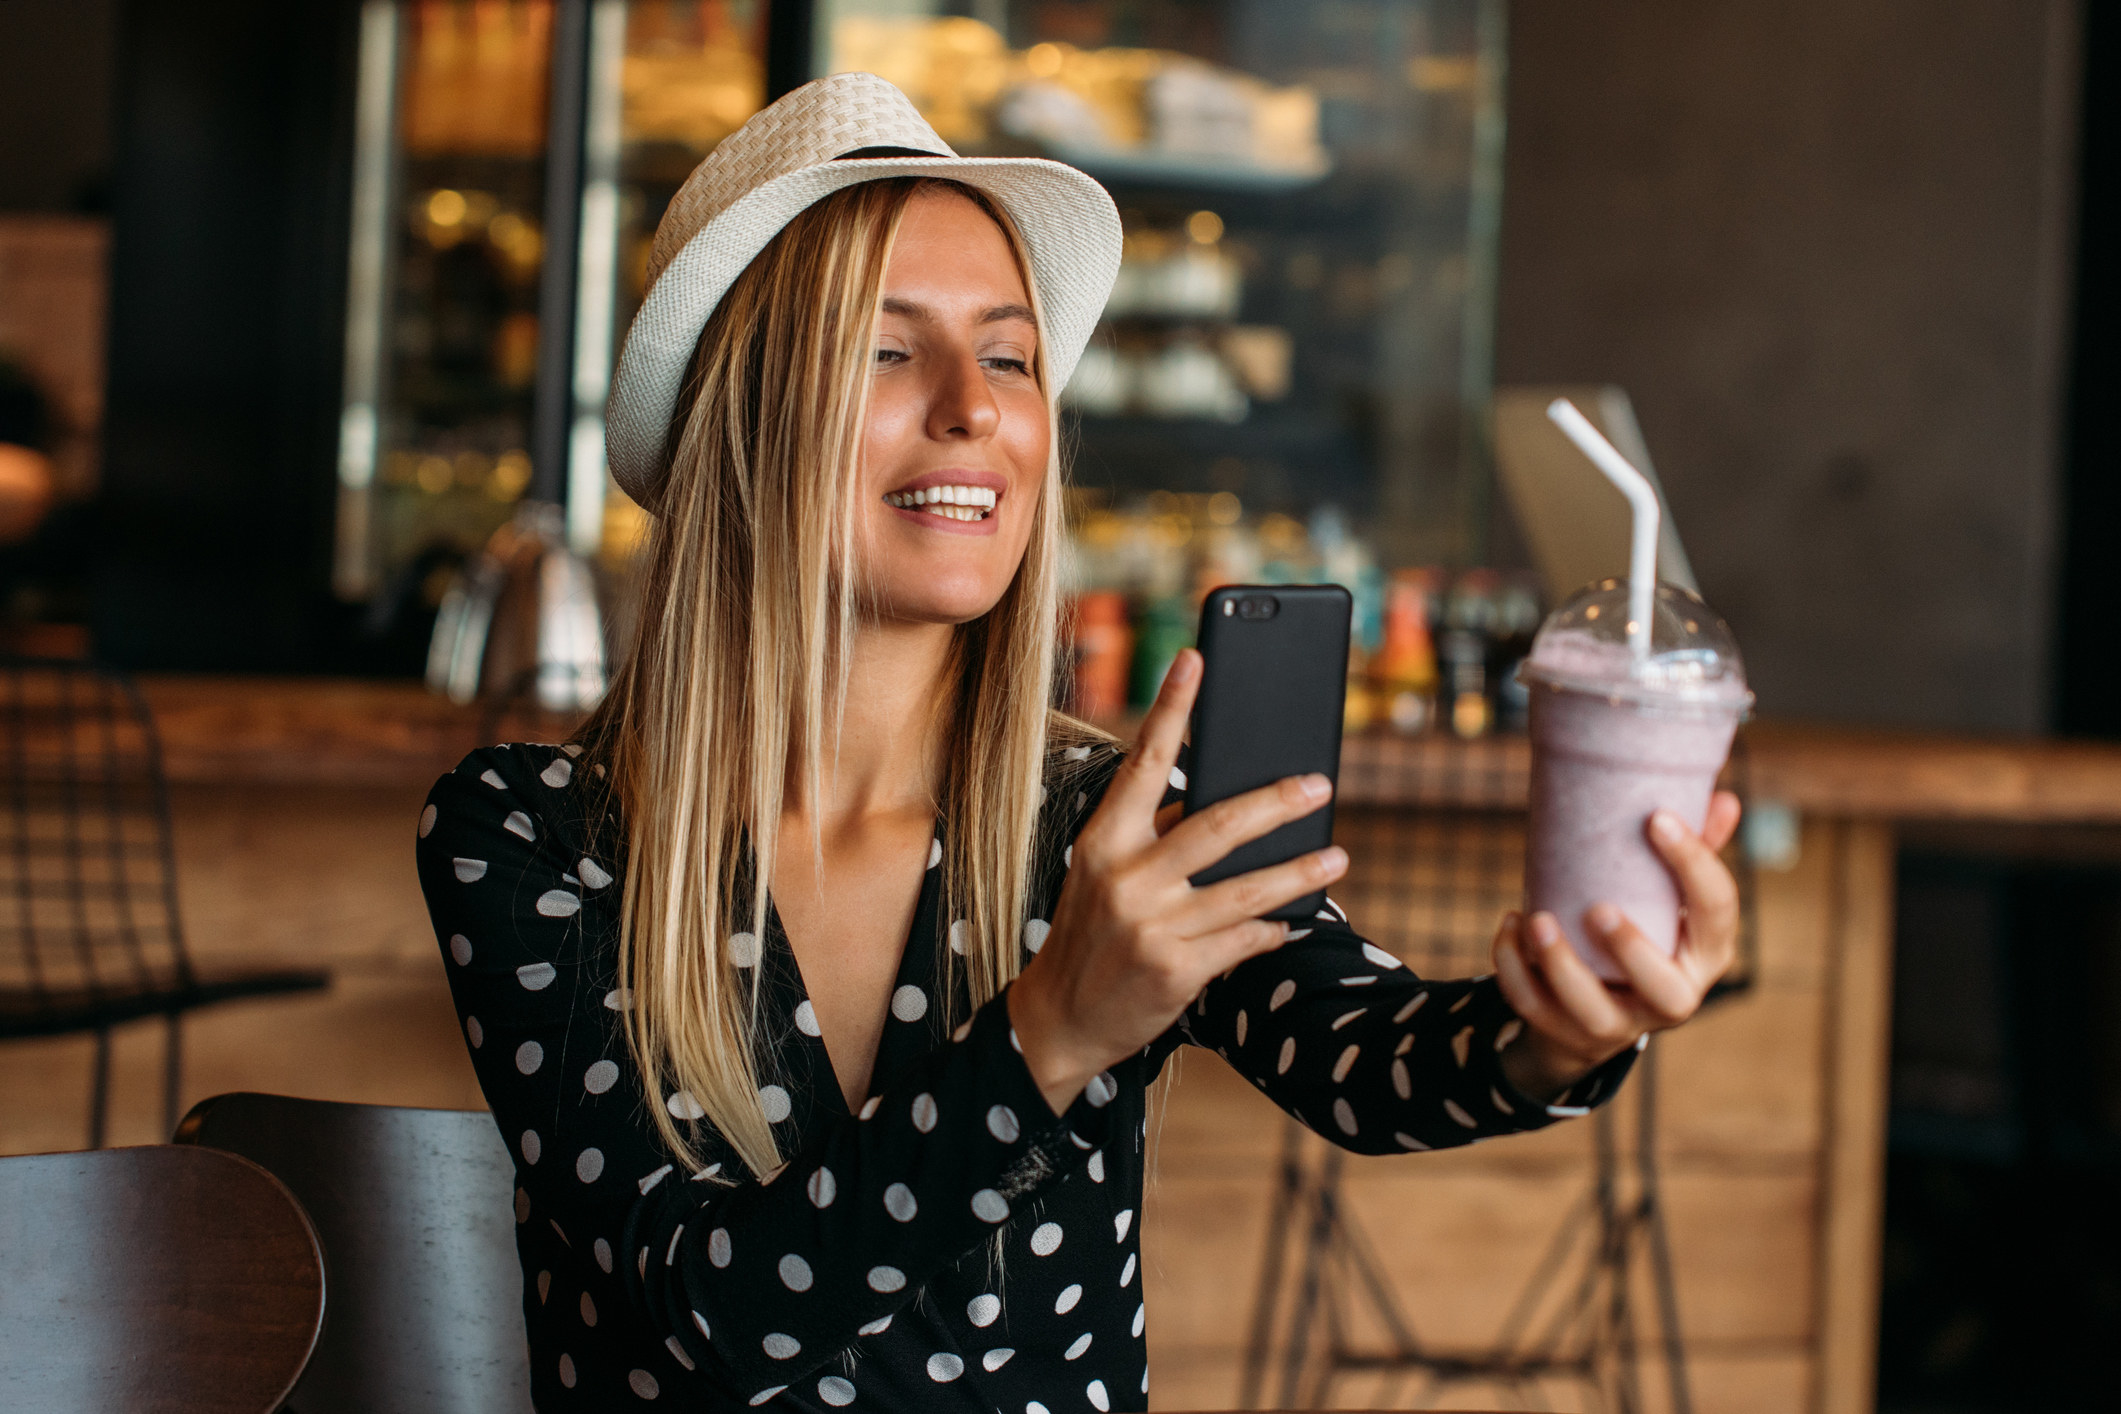 Woman holding a smoothie and taking a selfie